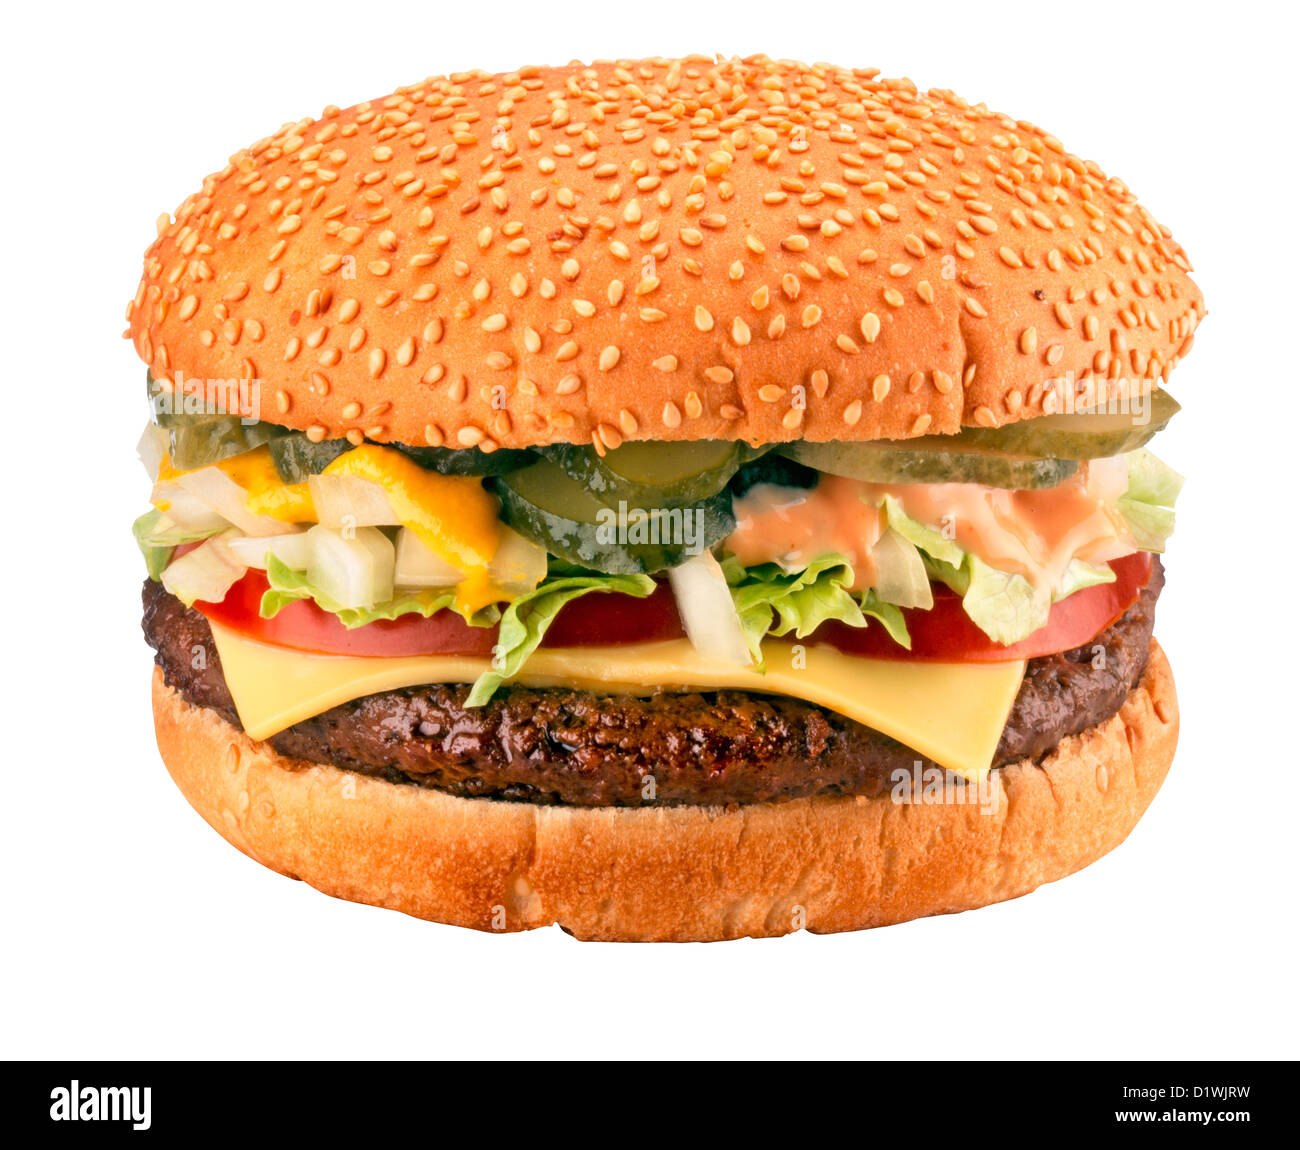 CUT OUT OF CHEESEBURGER Stock Photo